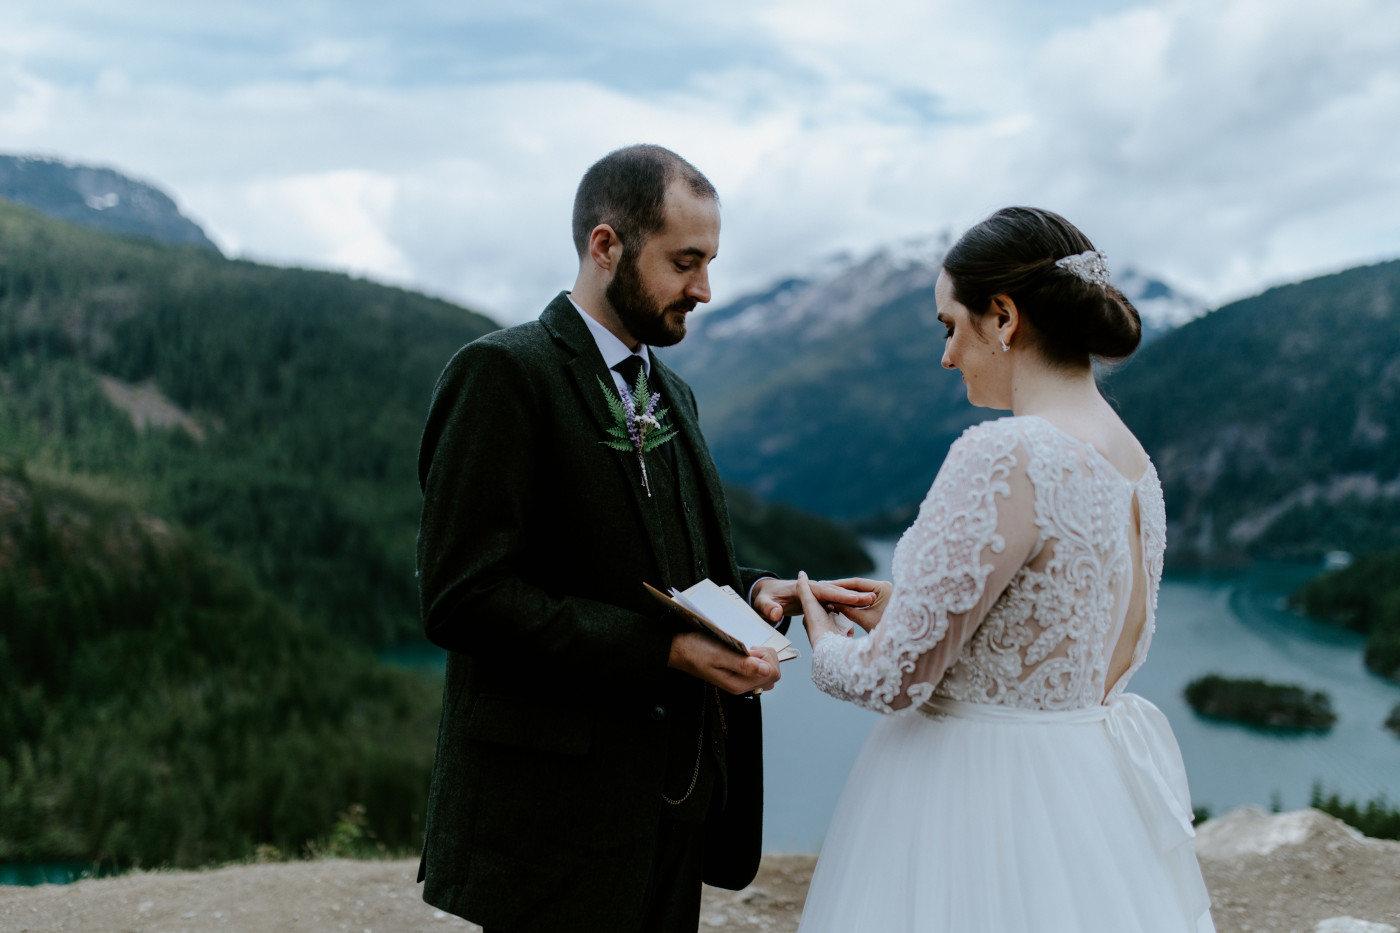 Alex and Elizabeth finalizing the ceremony. Elopement photography at North Cascades National Park by Sienna Plus Josh.